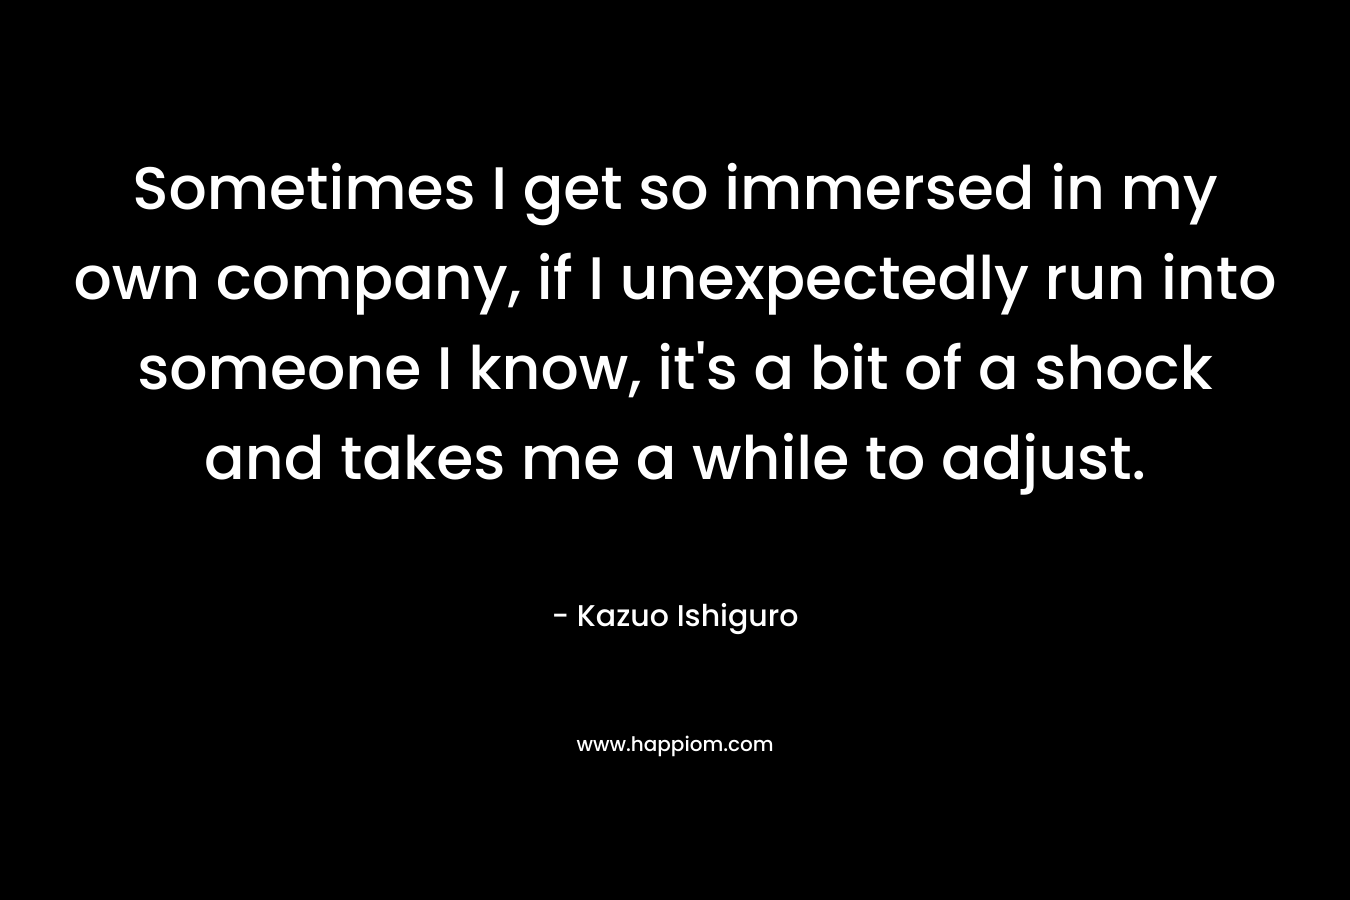 Sometimes I get so immersed in my own company, if I unexpectedly run into someone I know, it’s a bit of a shock and takes me a while to adjust. – Kazuo Ishiguro